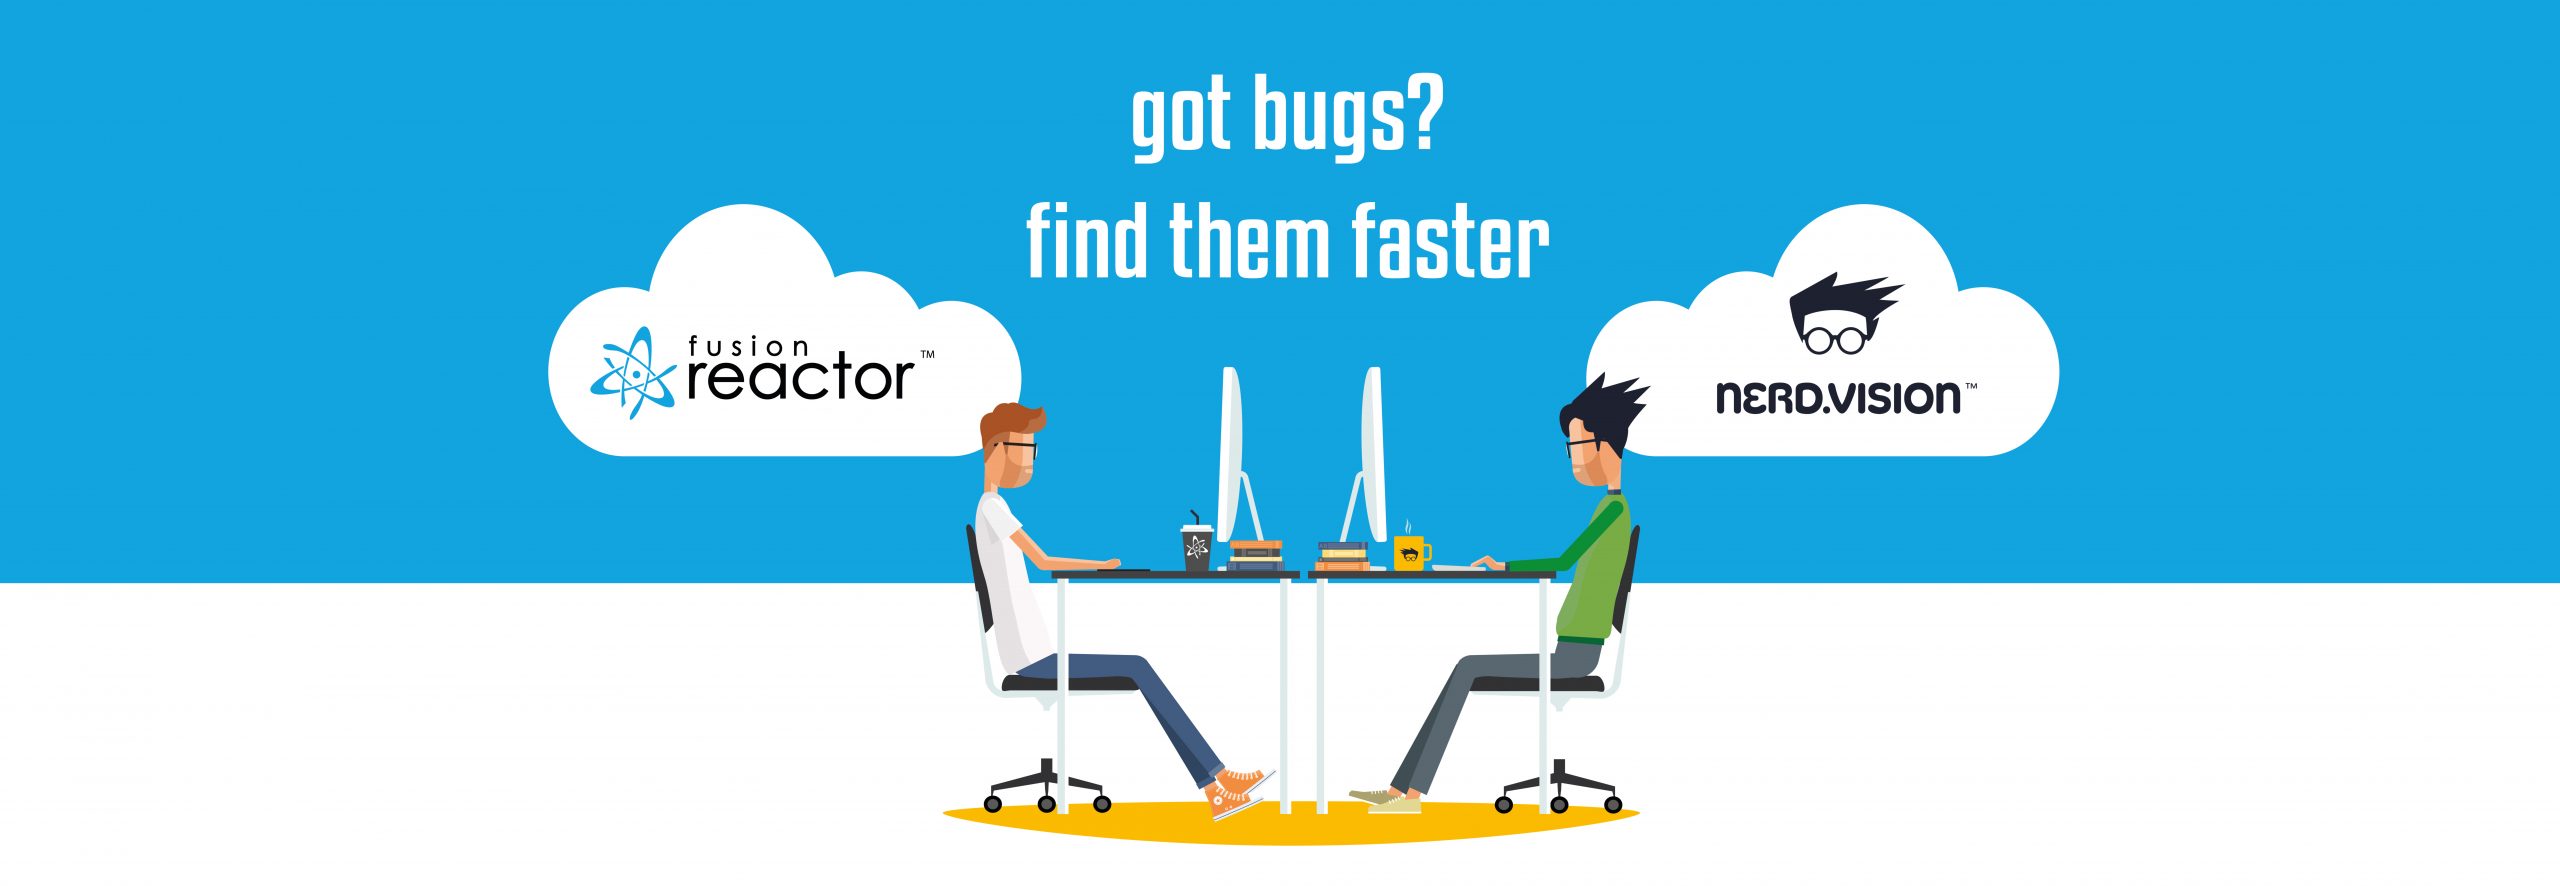 Find bugs fast